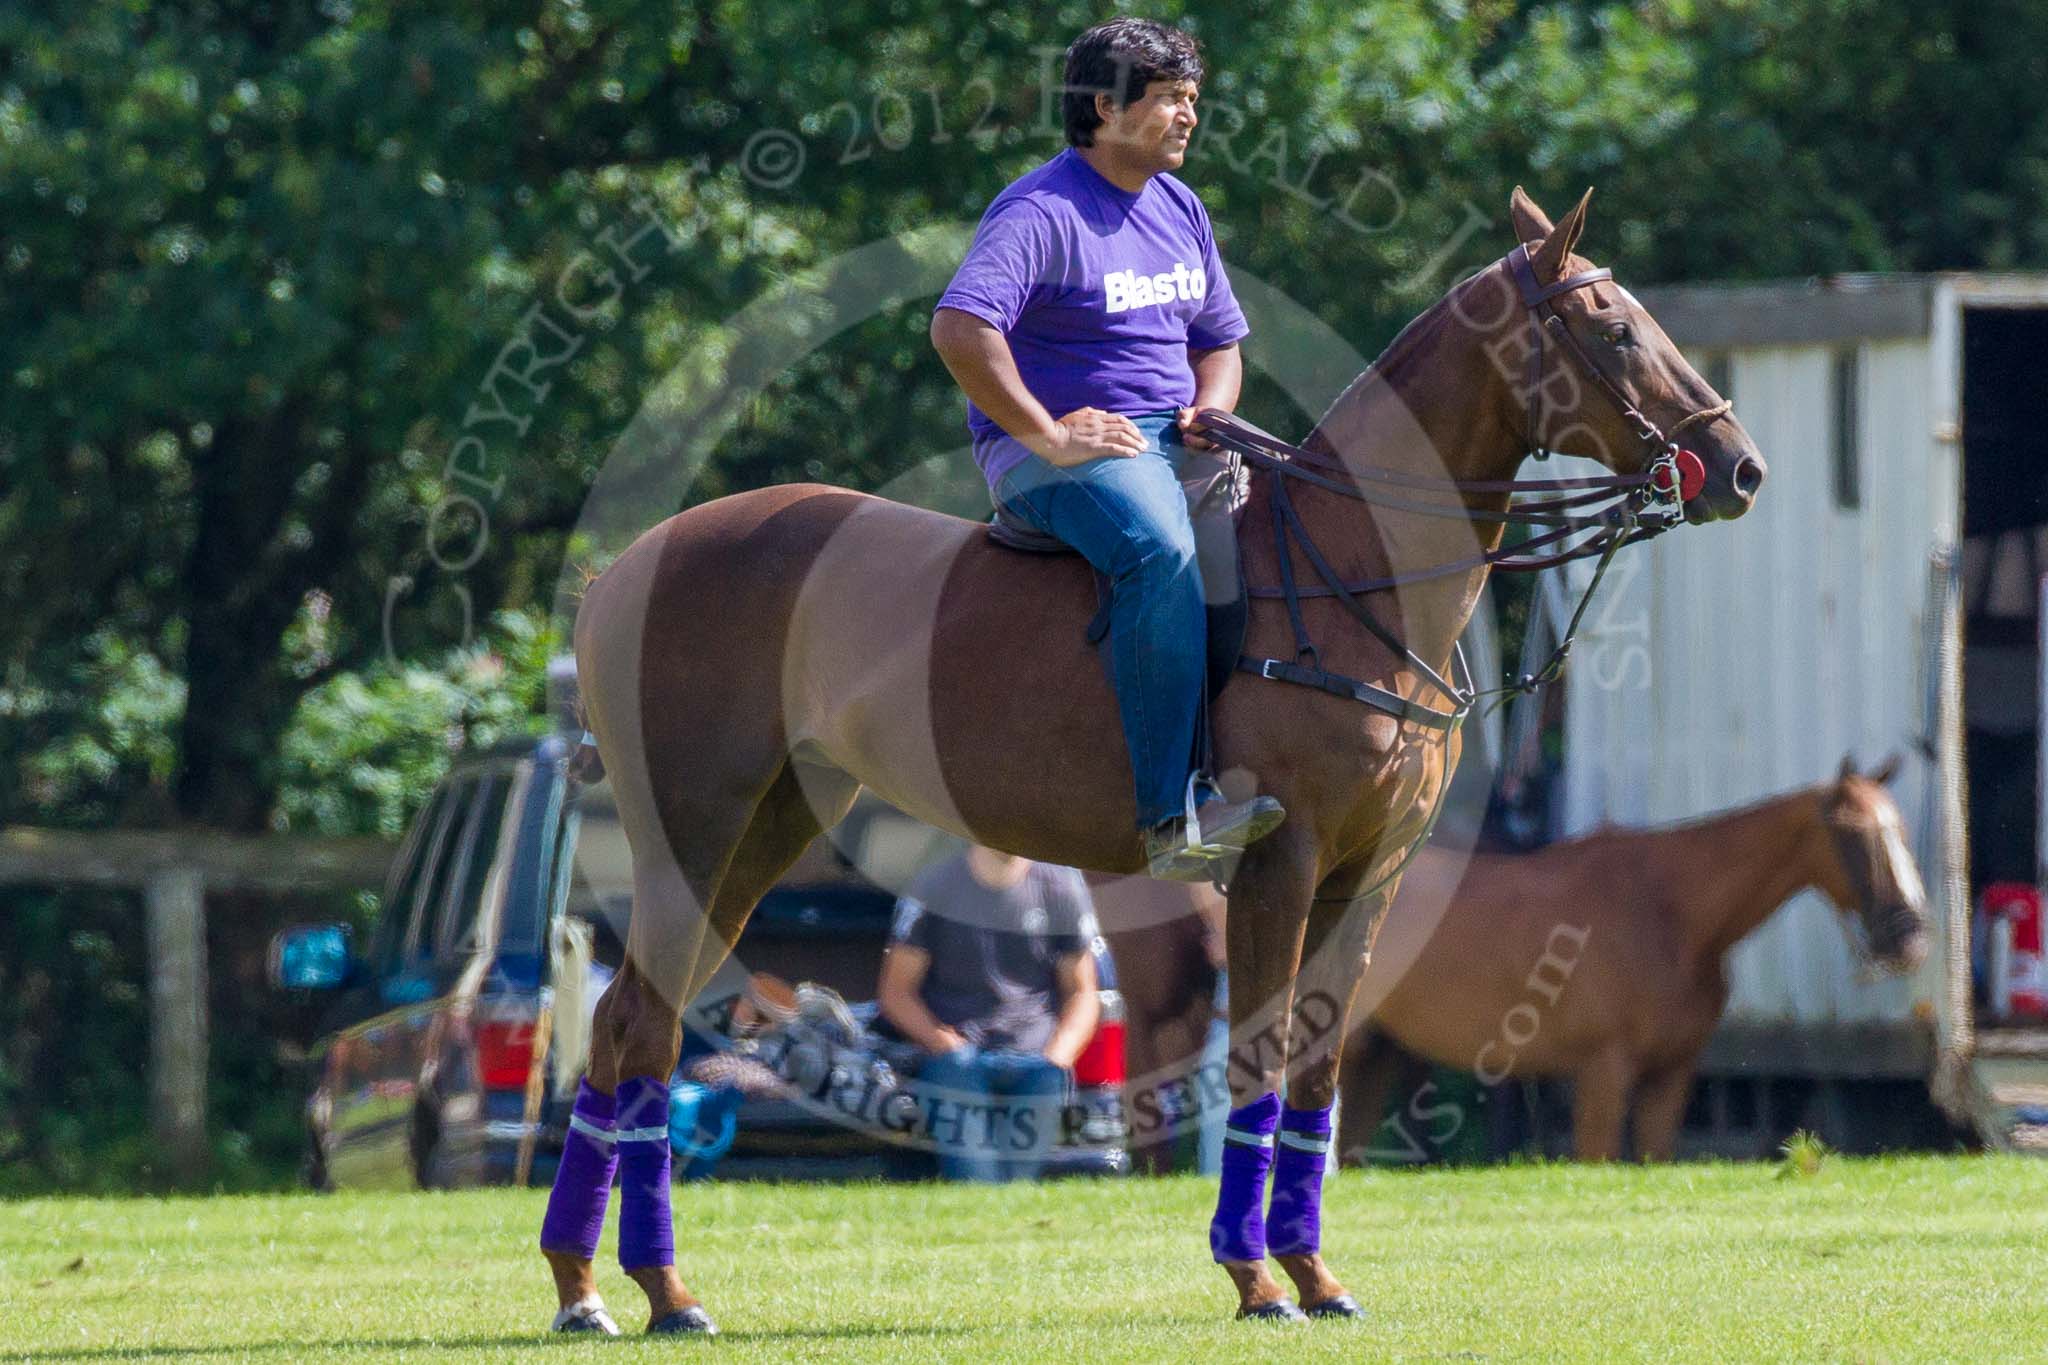 7th Heritage Polo Cup finals: Groom Emerging Switzerland Team..
Hurtwood Park Polo Club,
Ewhurst Green,
Surrey,
United Kingdom,
on 05 August 2012 at 15:24, image #160